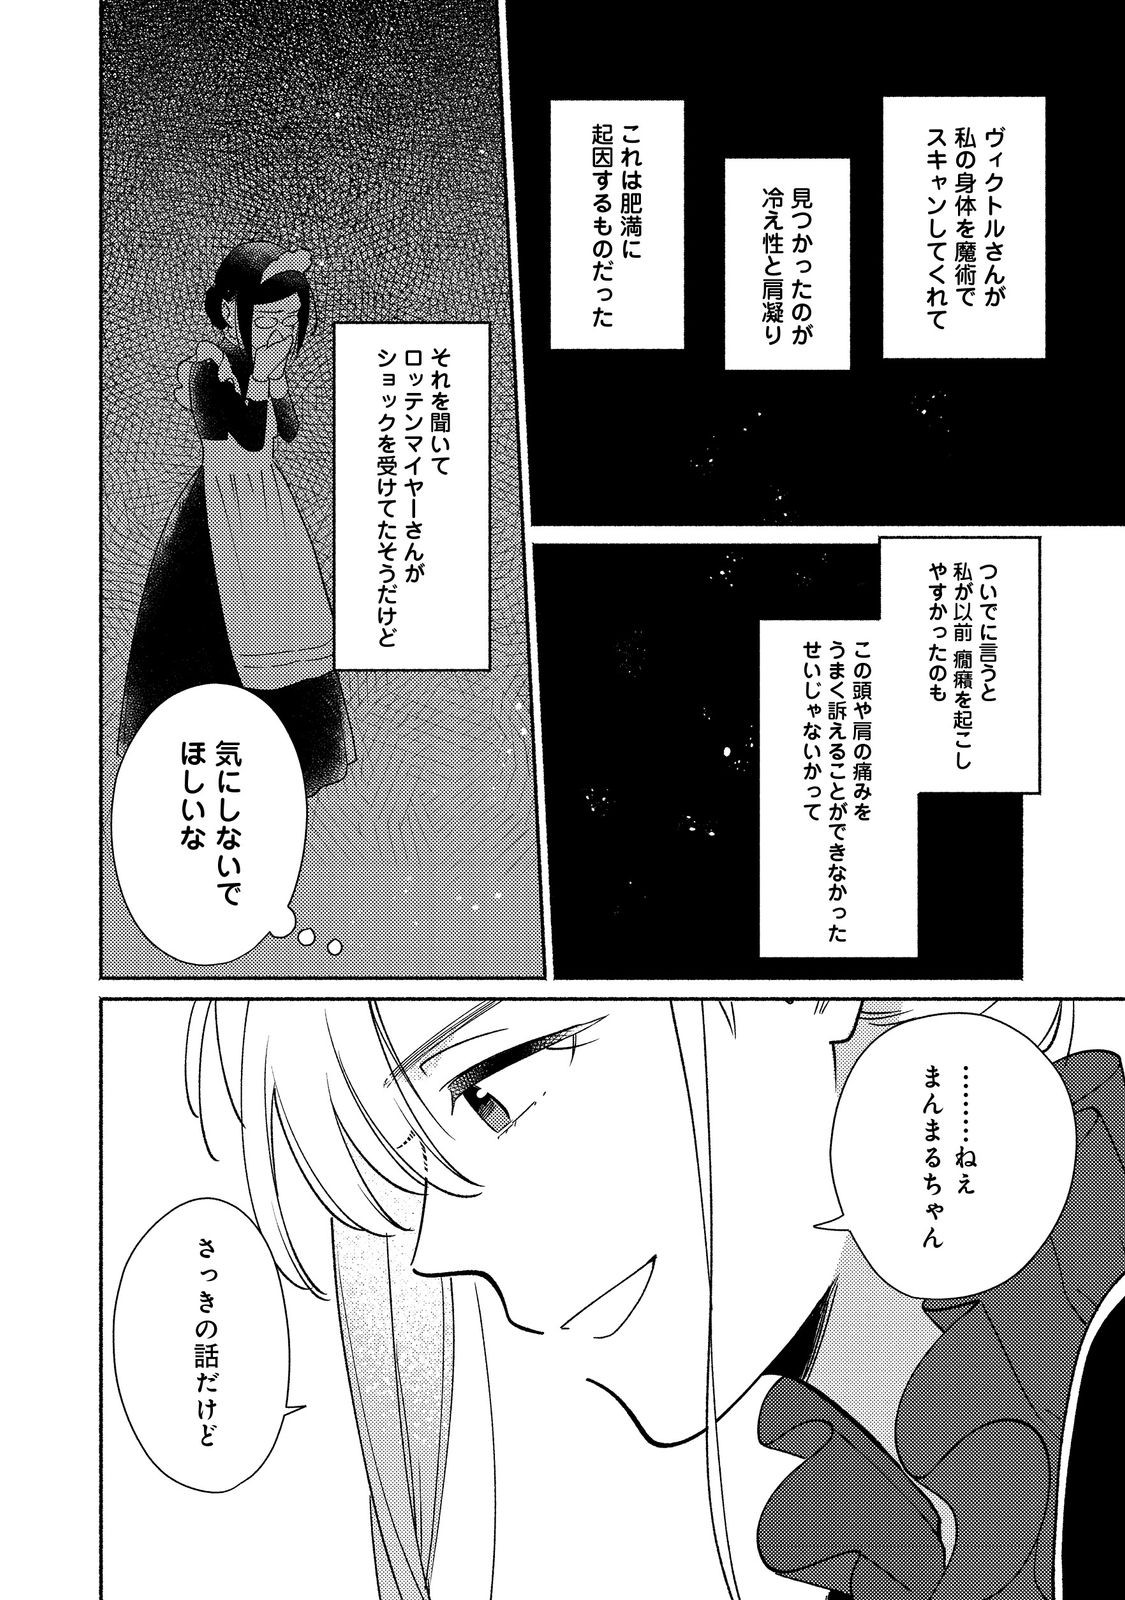 I’m the White Pig Nobleman 第20.1話 - Page 6